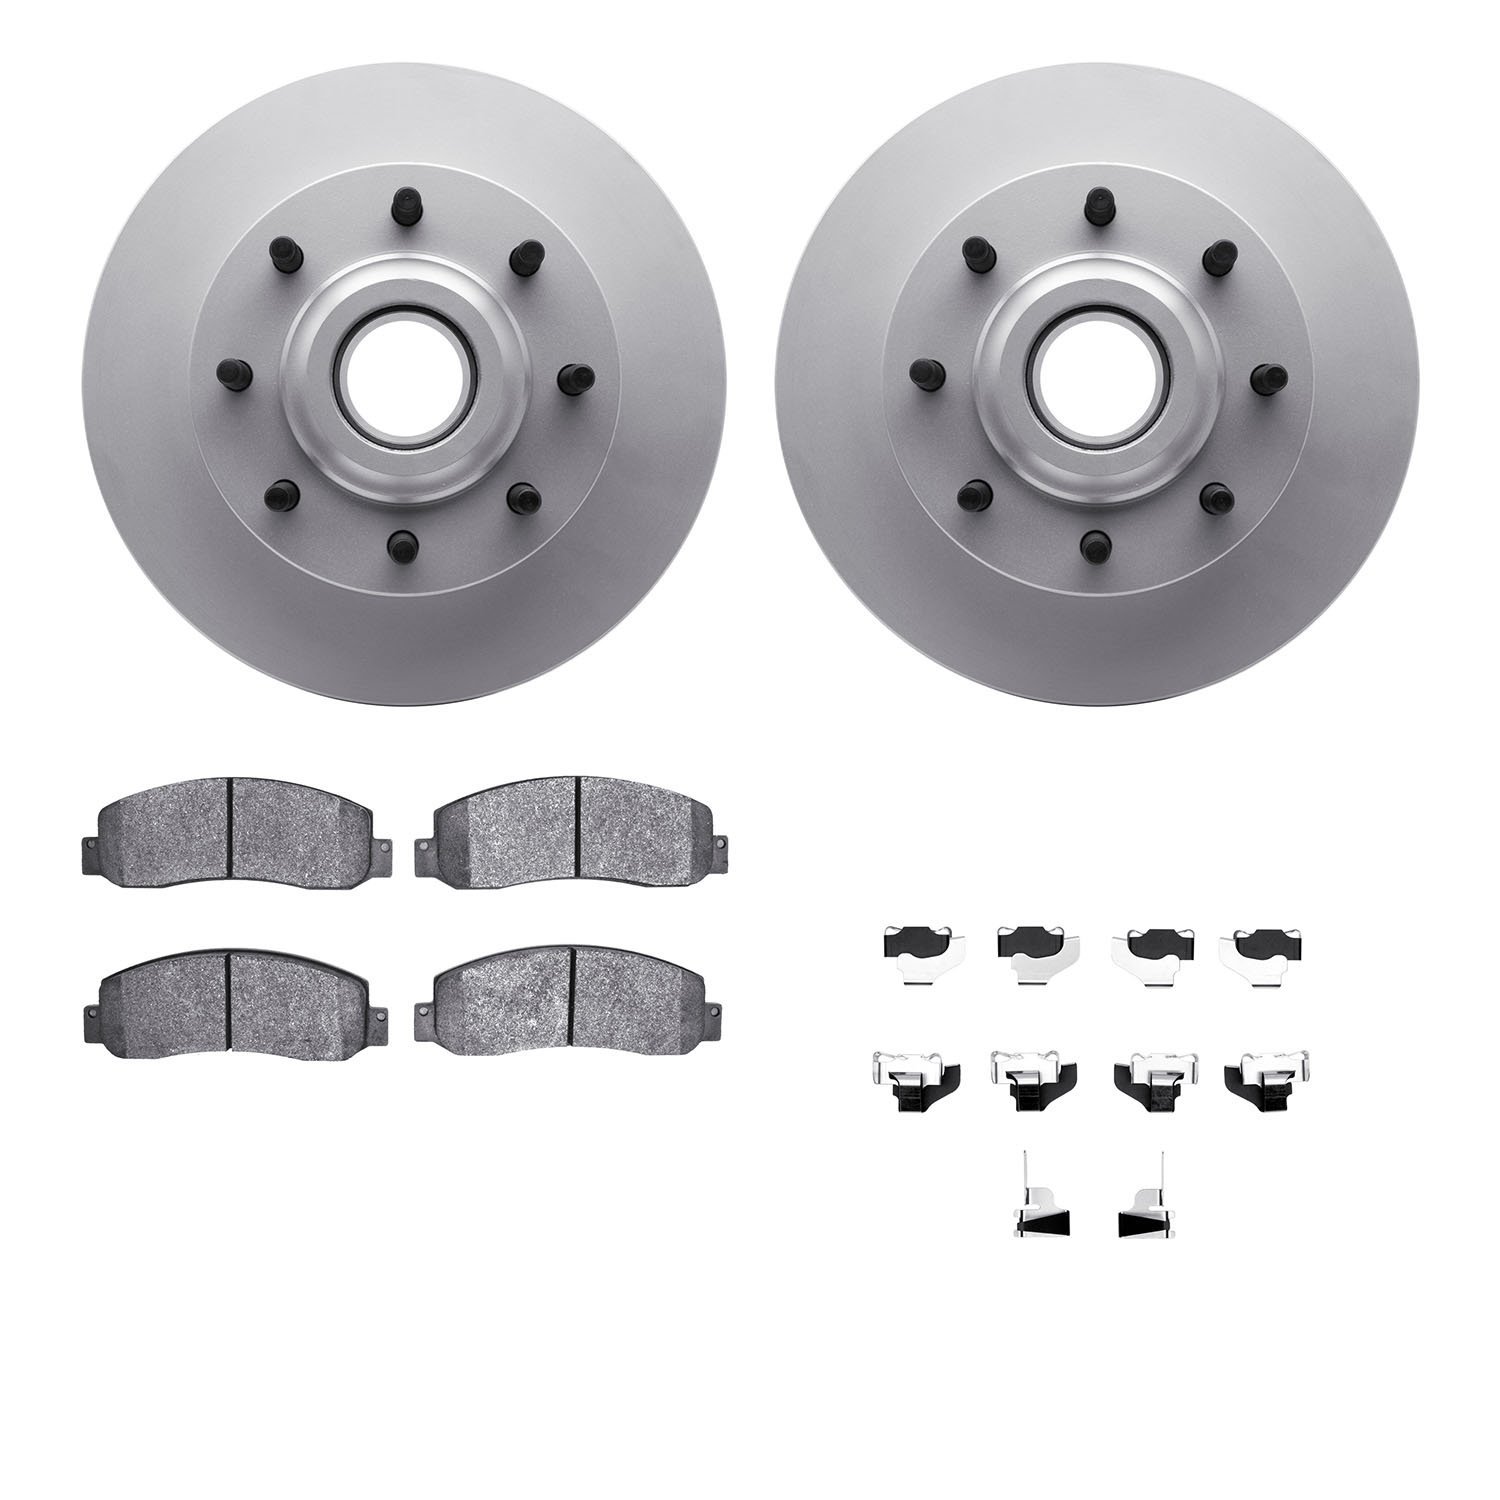 4412-54064 Geospec Brake Rotors with Ultimate-Duty Brake Pads & Hardware, 2006-2012 Ford/Lincoln/Mercury/Mazda, Position: Front